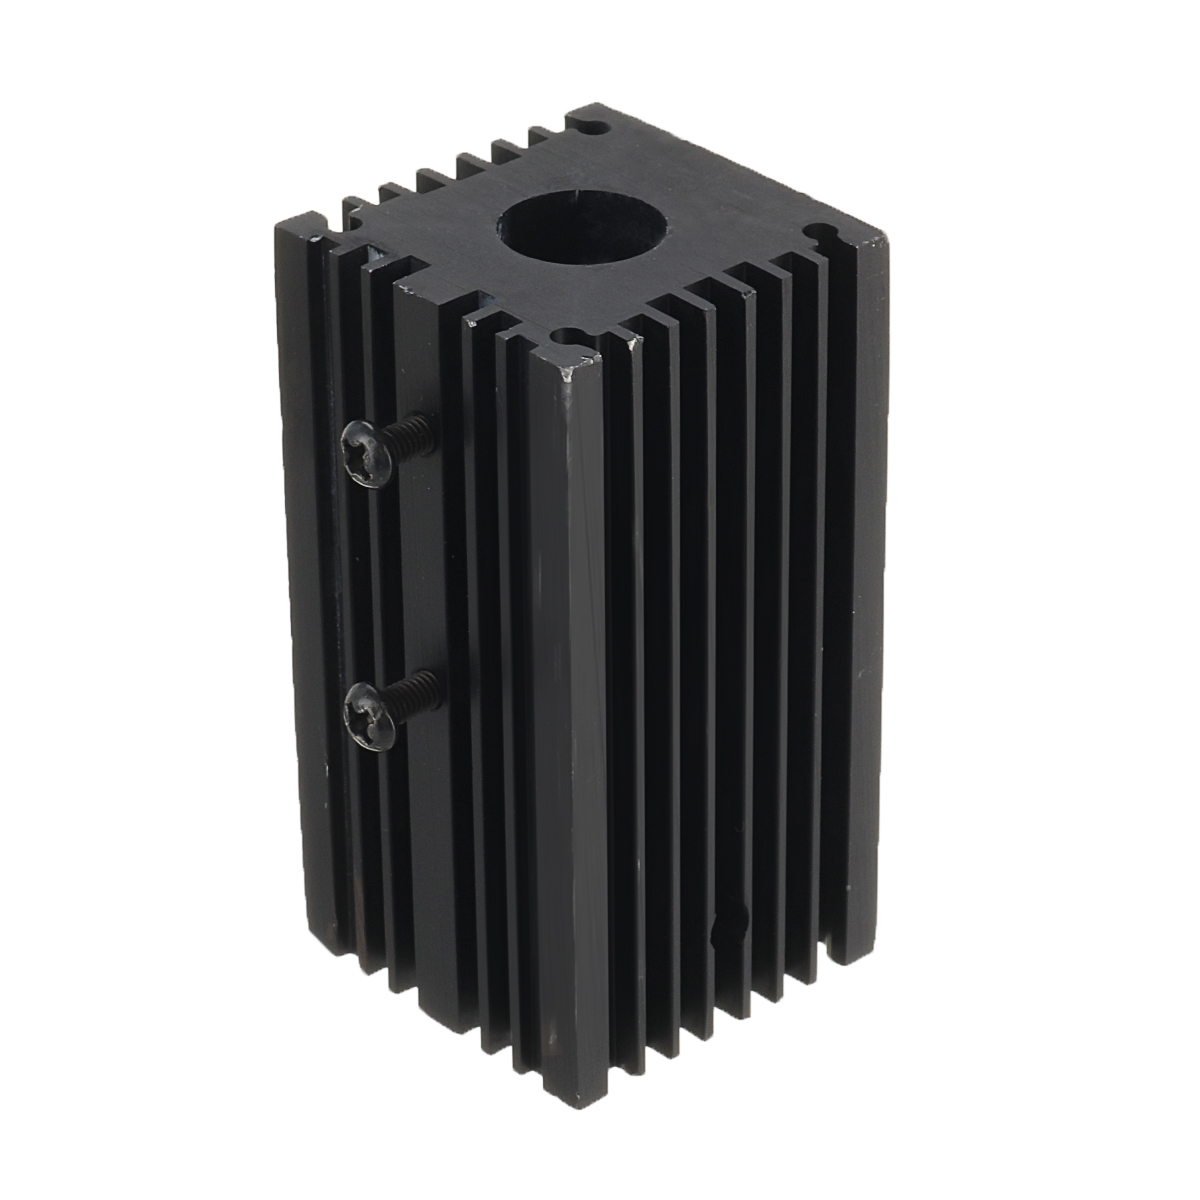 62x32x32mm 12mm Aluminum Heat Sink Groove Fixed Radiator Seat for 12mm Laser Diode Module 10